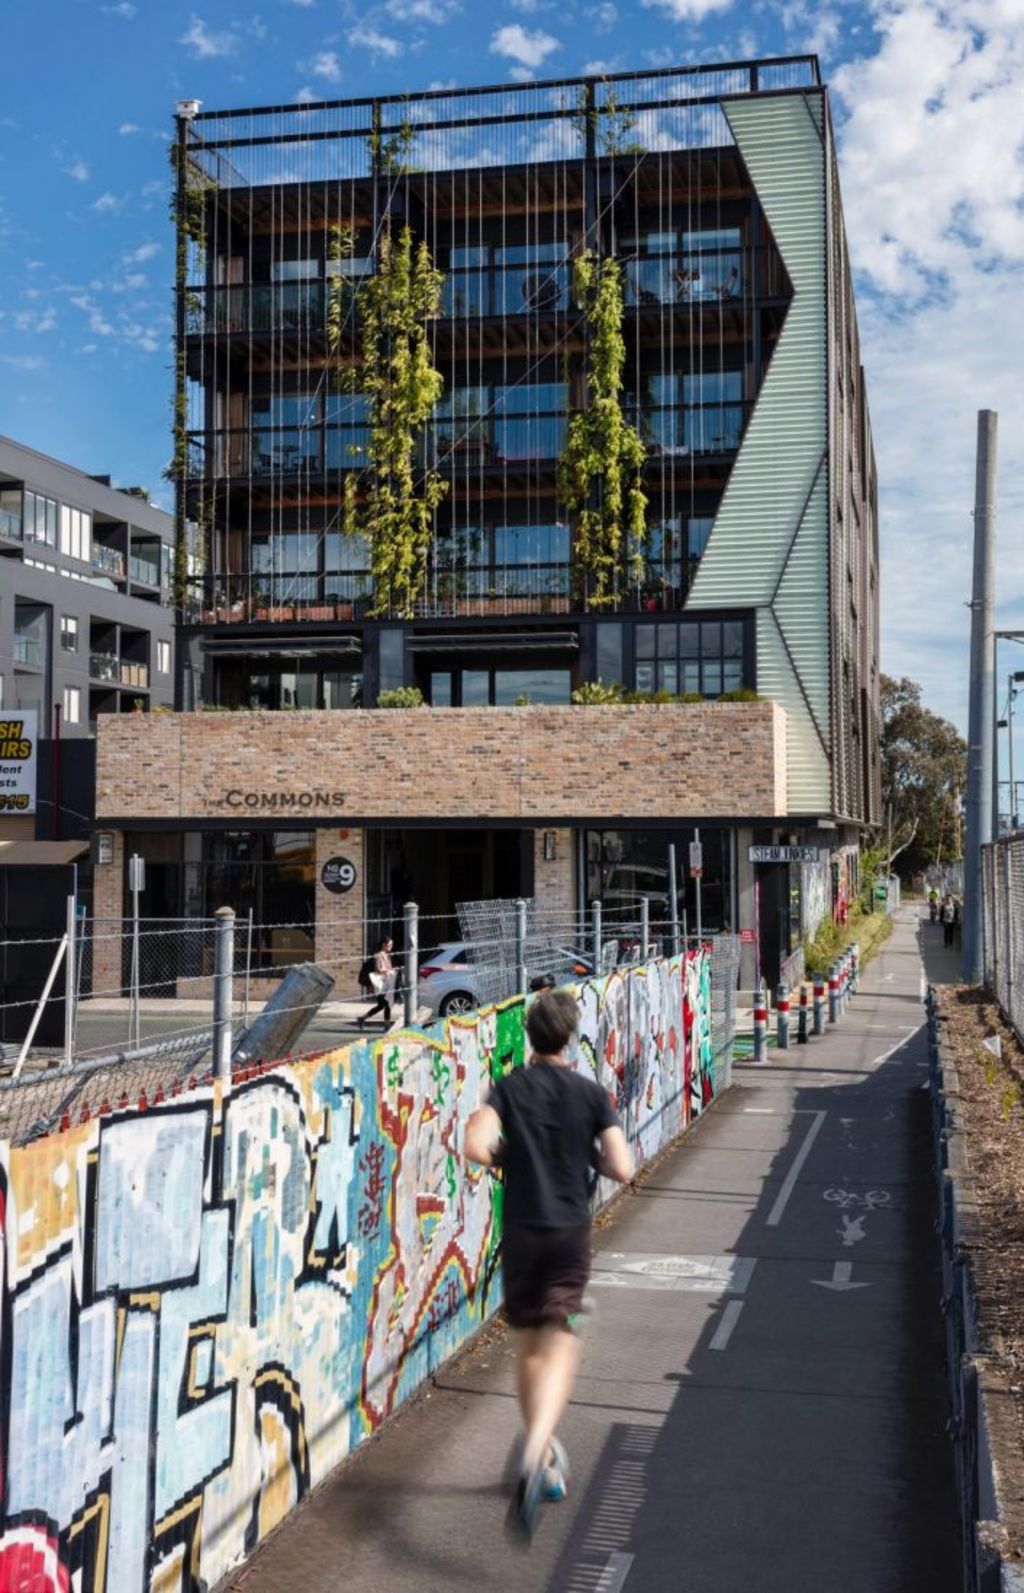 Vertical gardens are a feature of The Commons, a building type Melbourne needs more of, Fergus says. Photo: Diana Snape